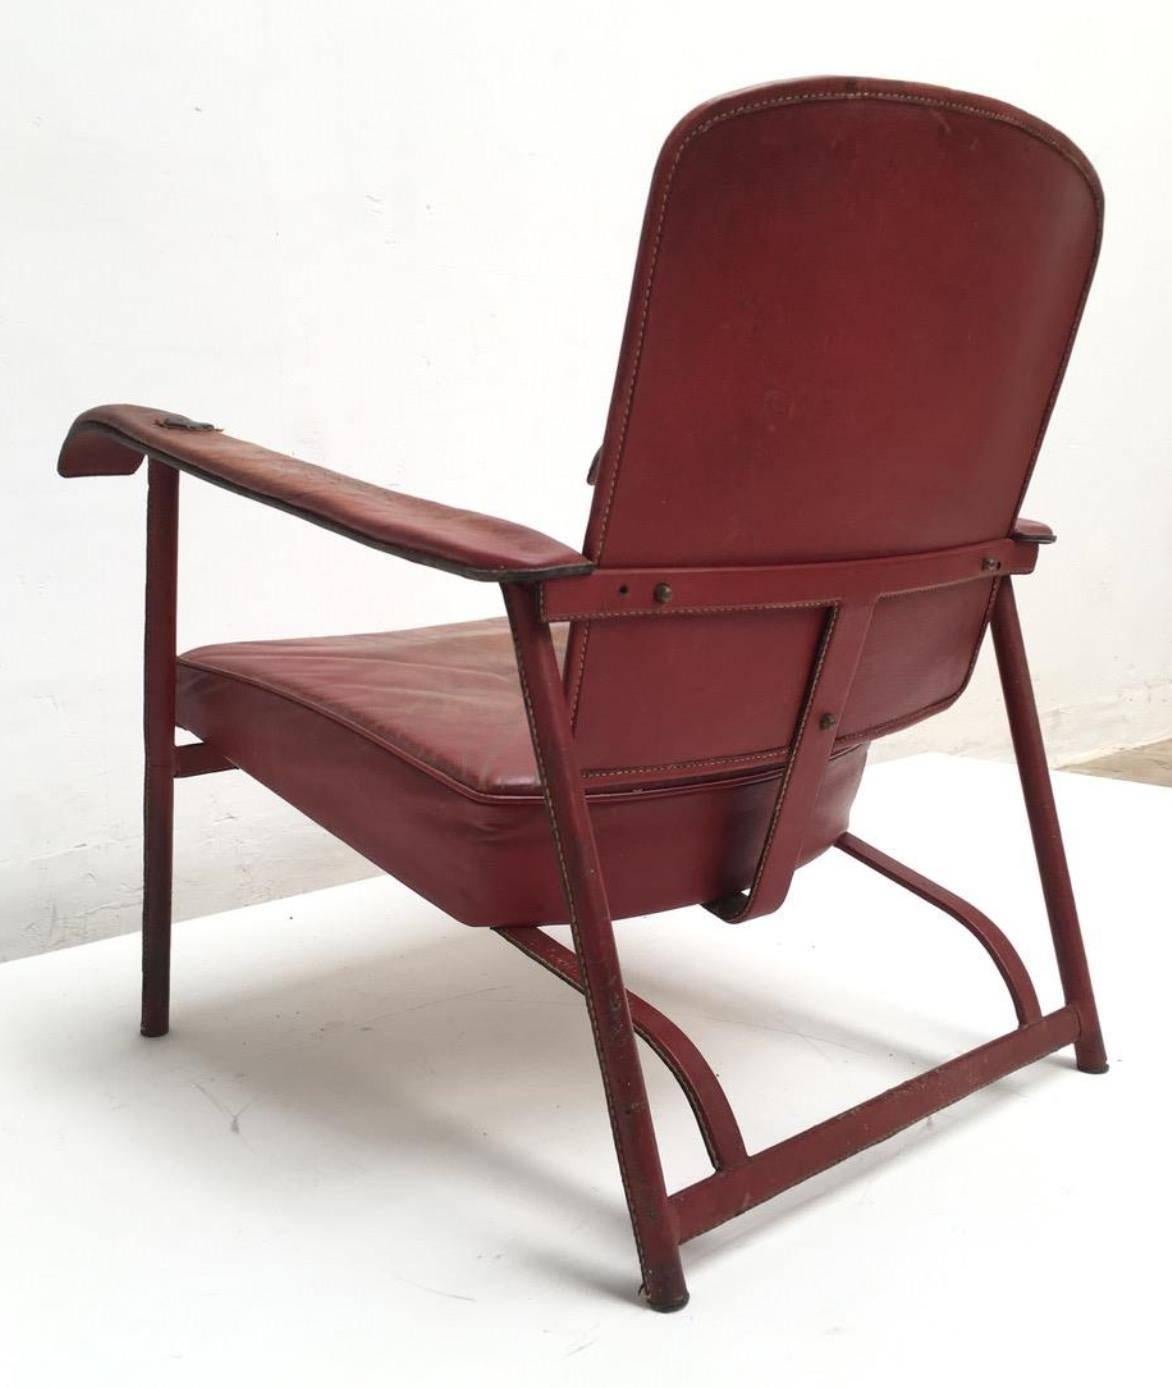 Mid-20th Century Rare Pair of Original Vintage Leather Adnet Lounge Chairs, France, 1950s